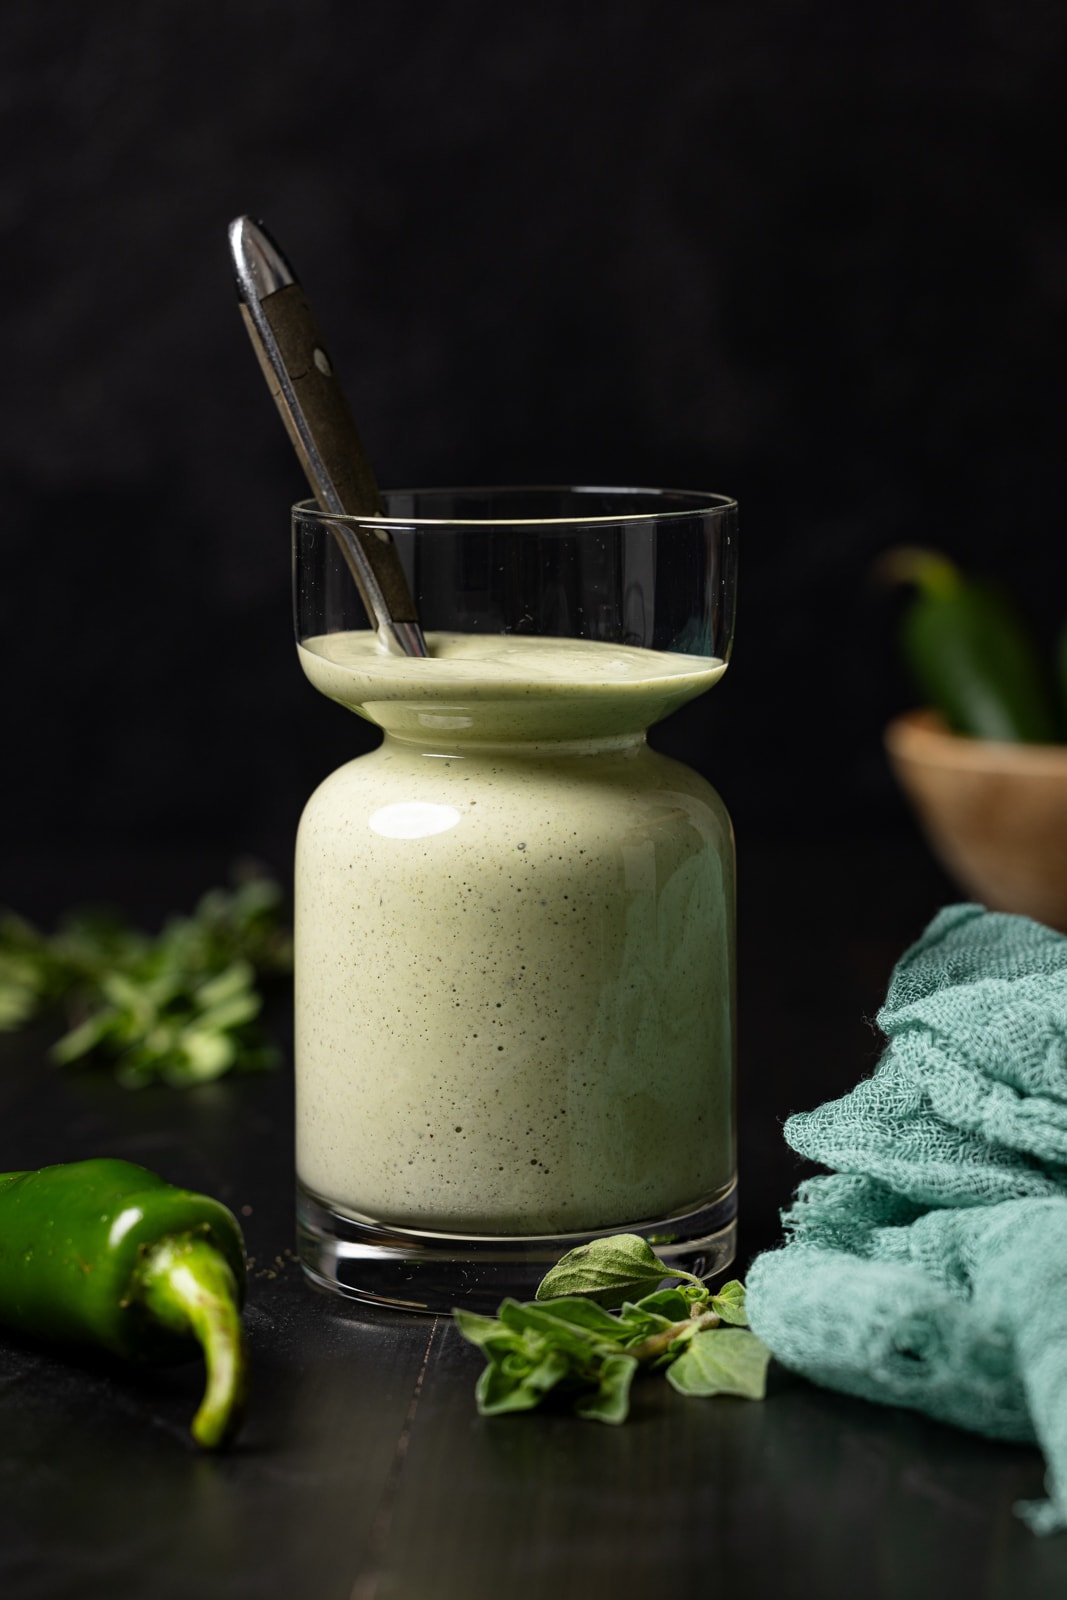 Sauce in a jar with a spoon and jalapenos.